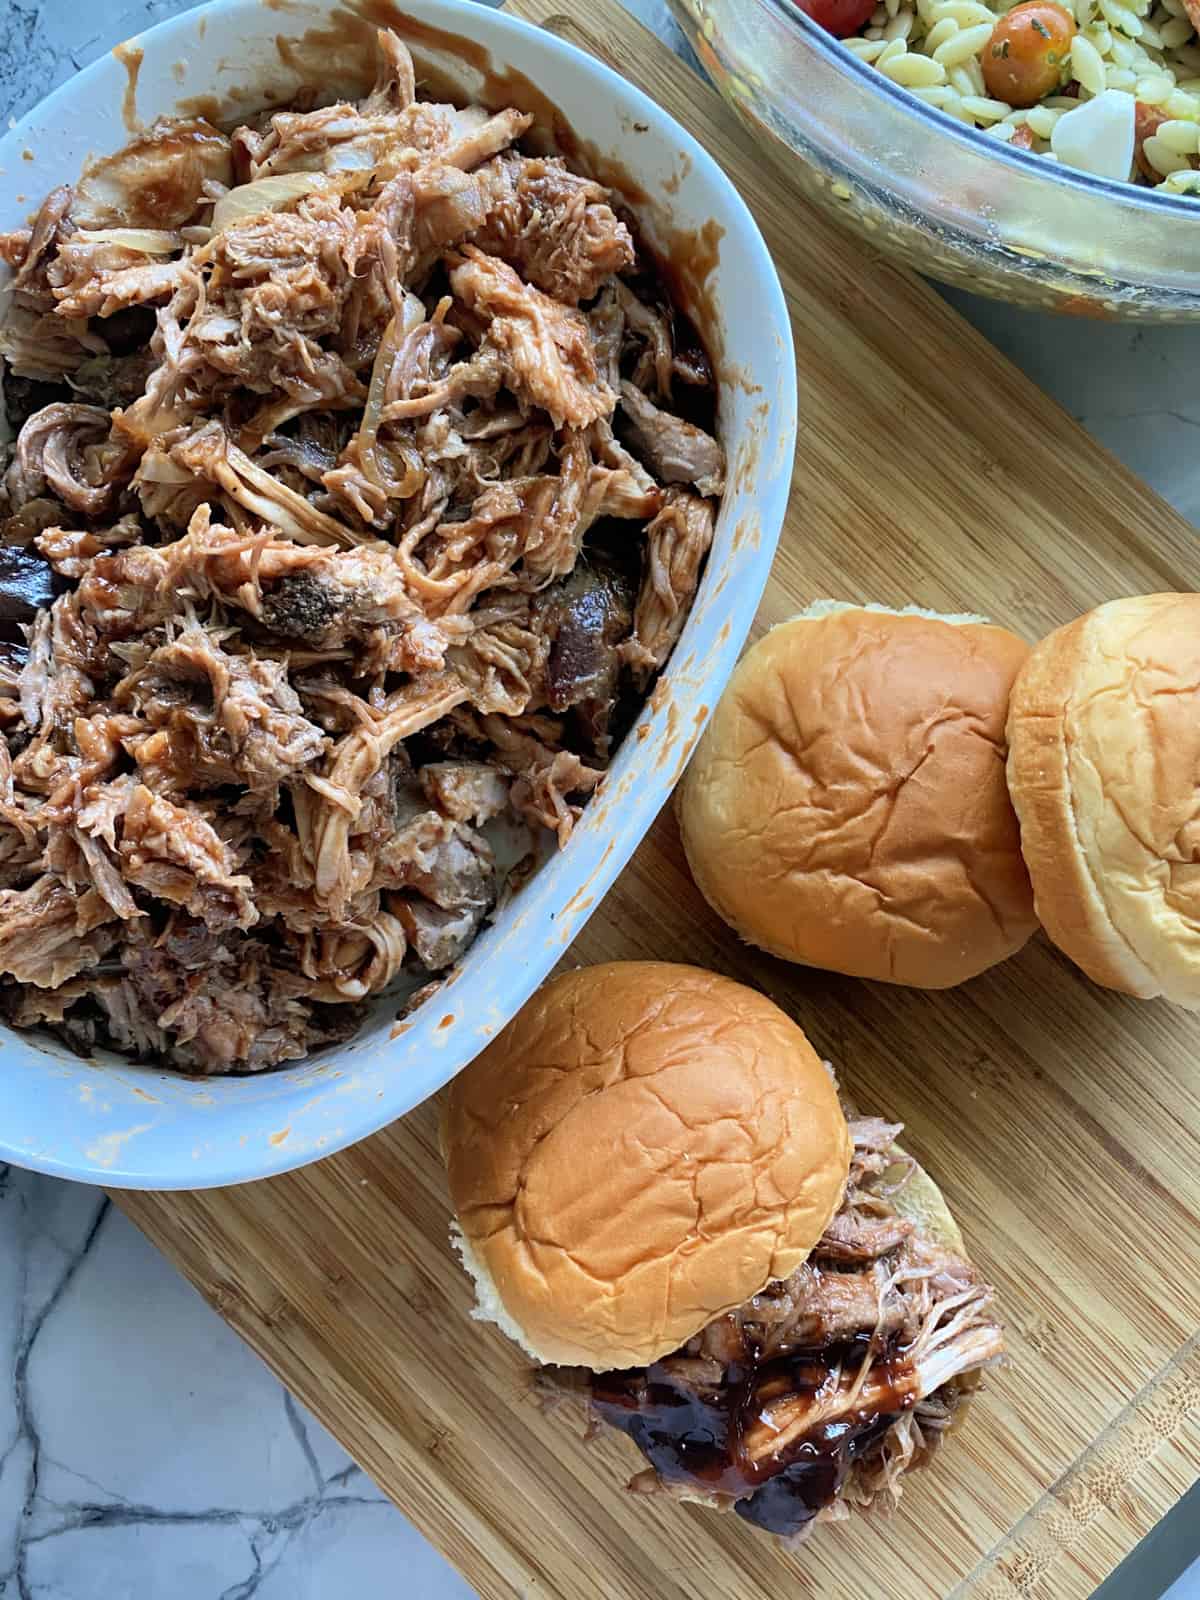 Top view of an oval dish on a wood cutting board with rolls and pulled pork sandwiches next to it.